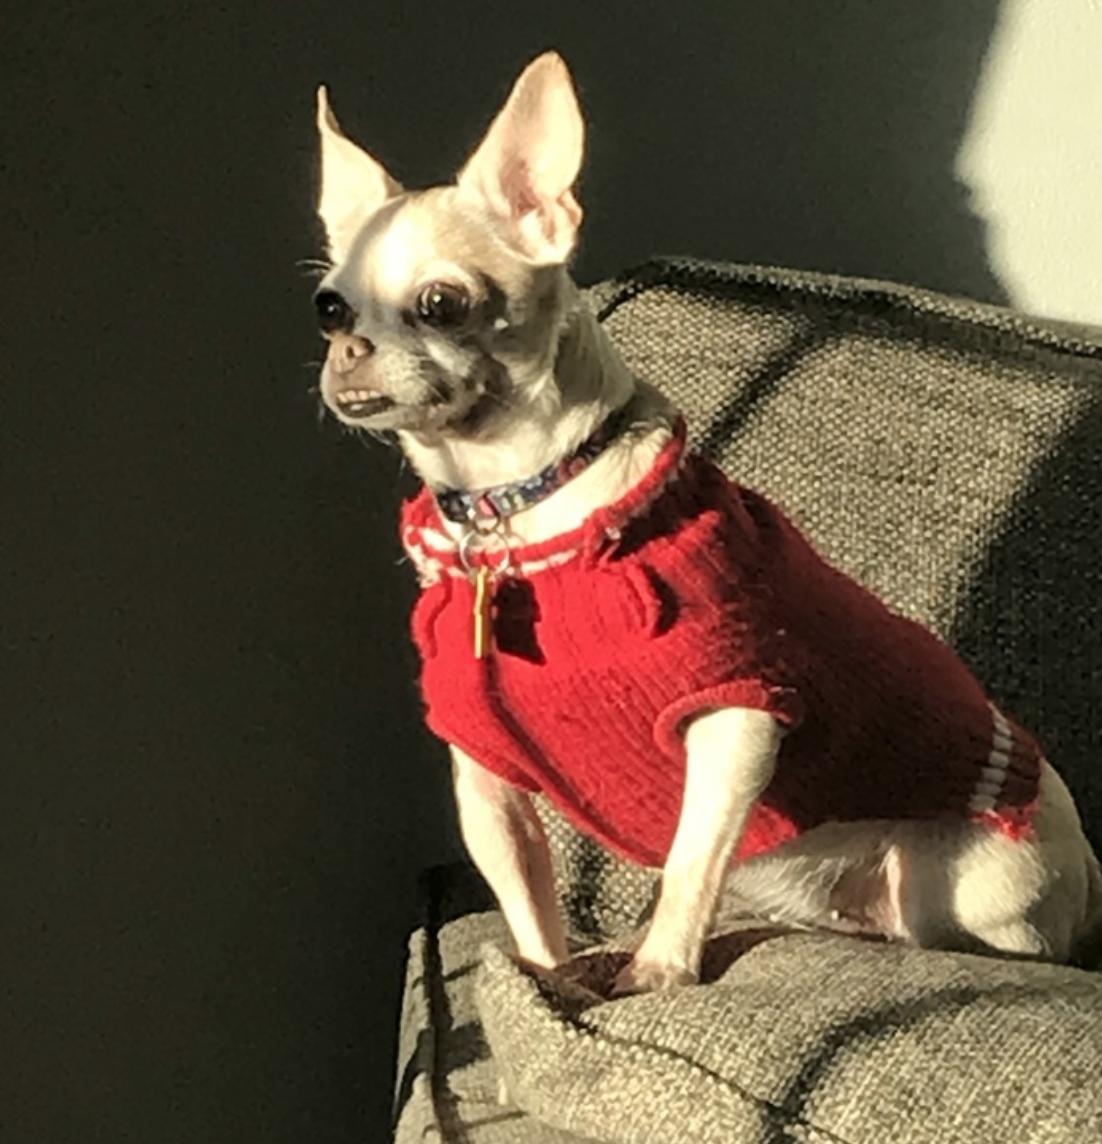 Sweet sweater on this pup ????

https://t.co/y8AjYL0fL8 https://t.co/xSMGtIGJGI